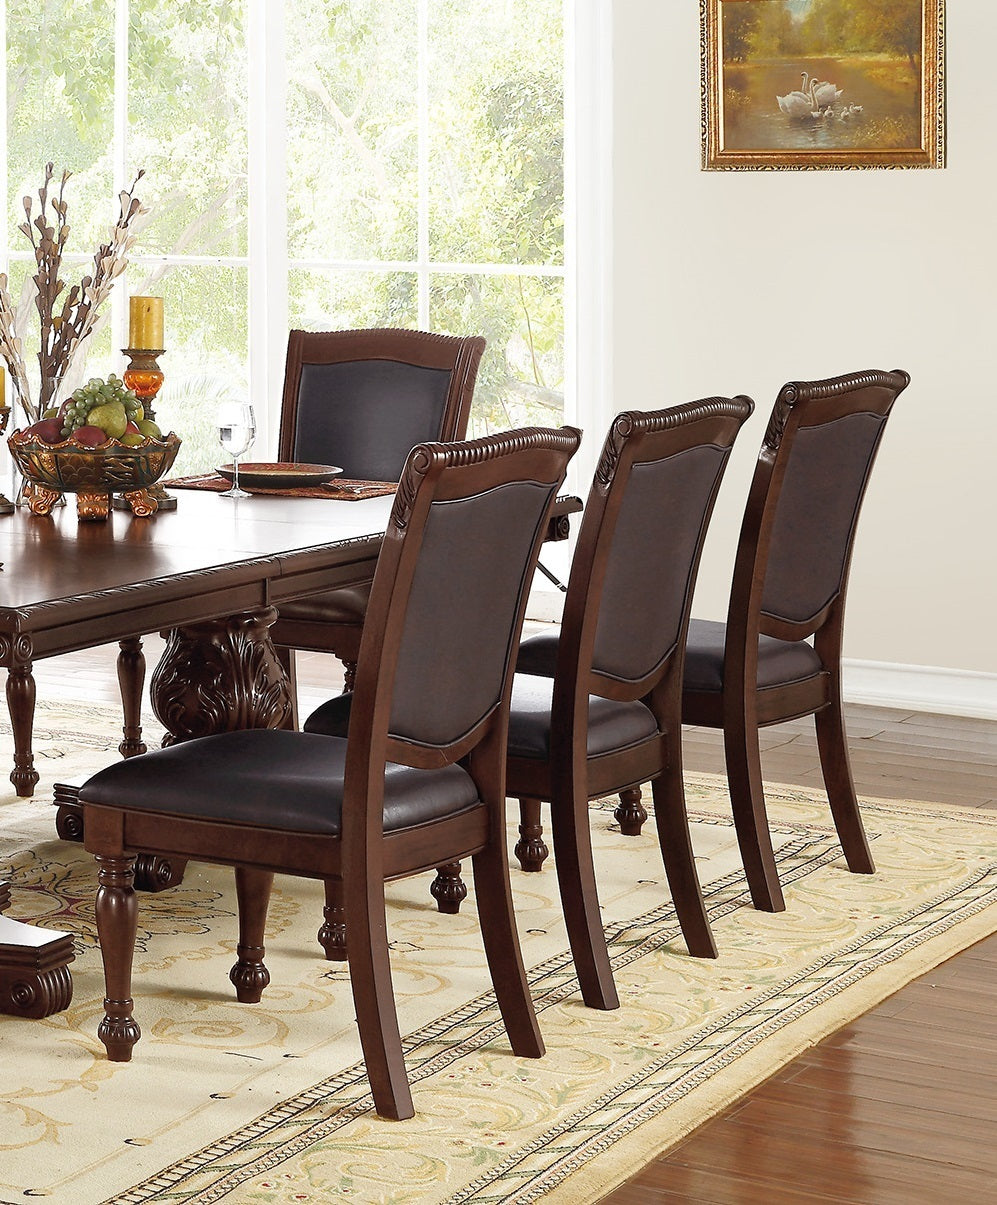 Gorgeous Formal Set of 2 Side Chairs Brown Color Rubberwood Dining Room Furniture Faux Leather Upholstered Seat